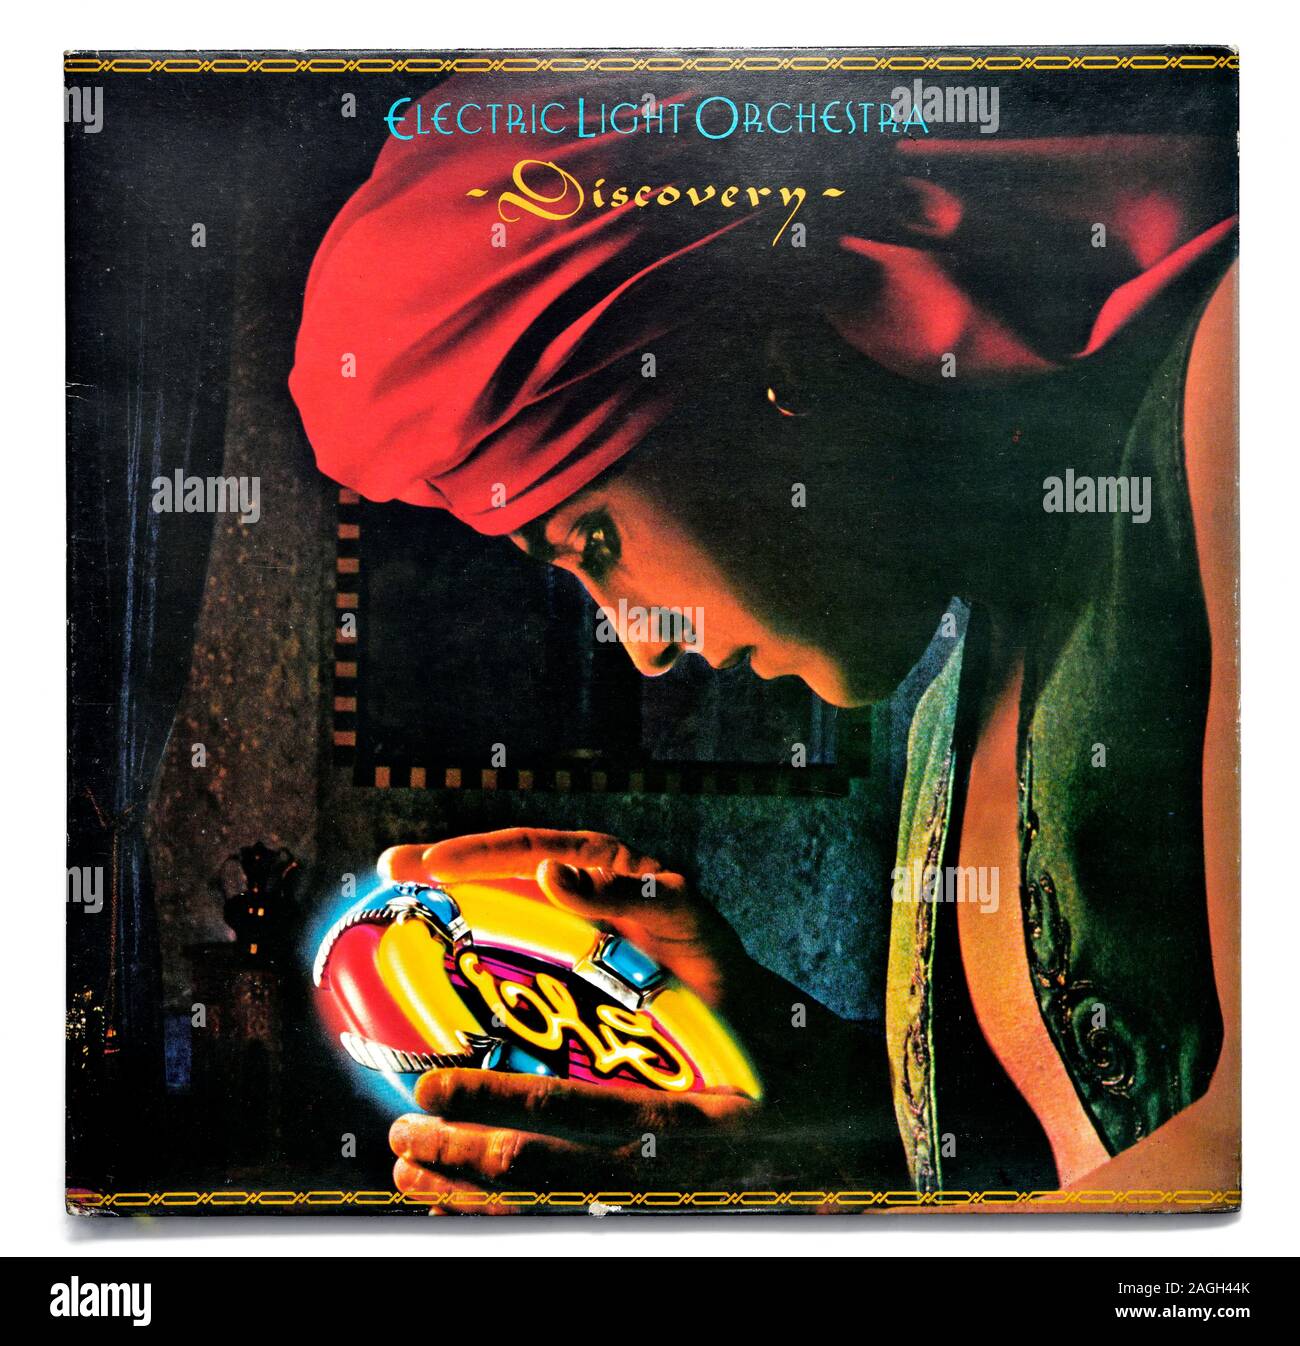 Electric light orchestra,Discovery album cover Stock Photo